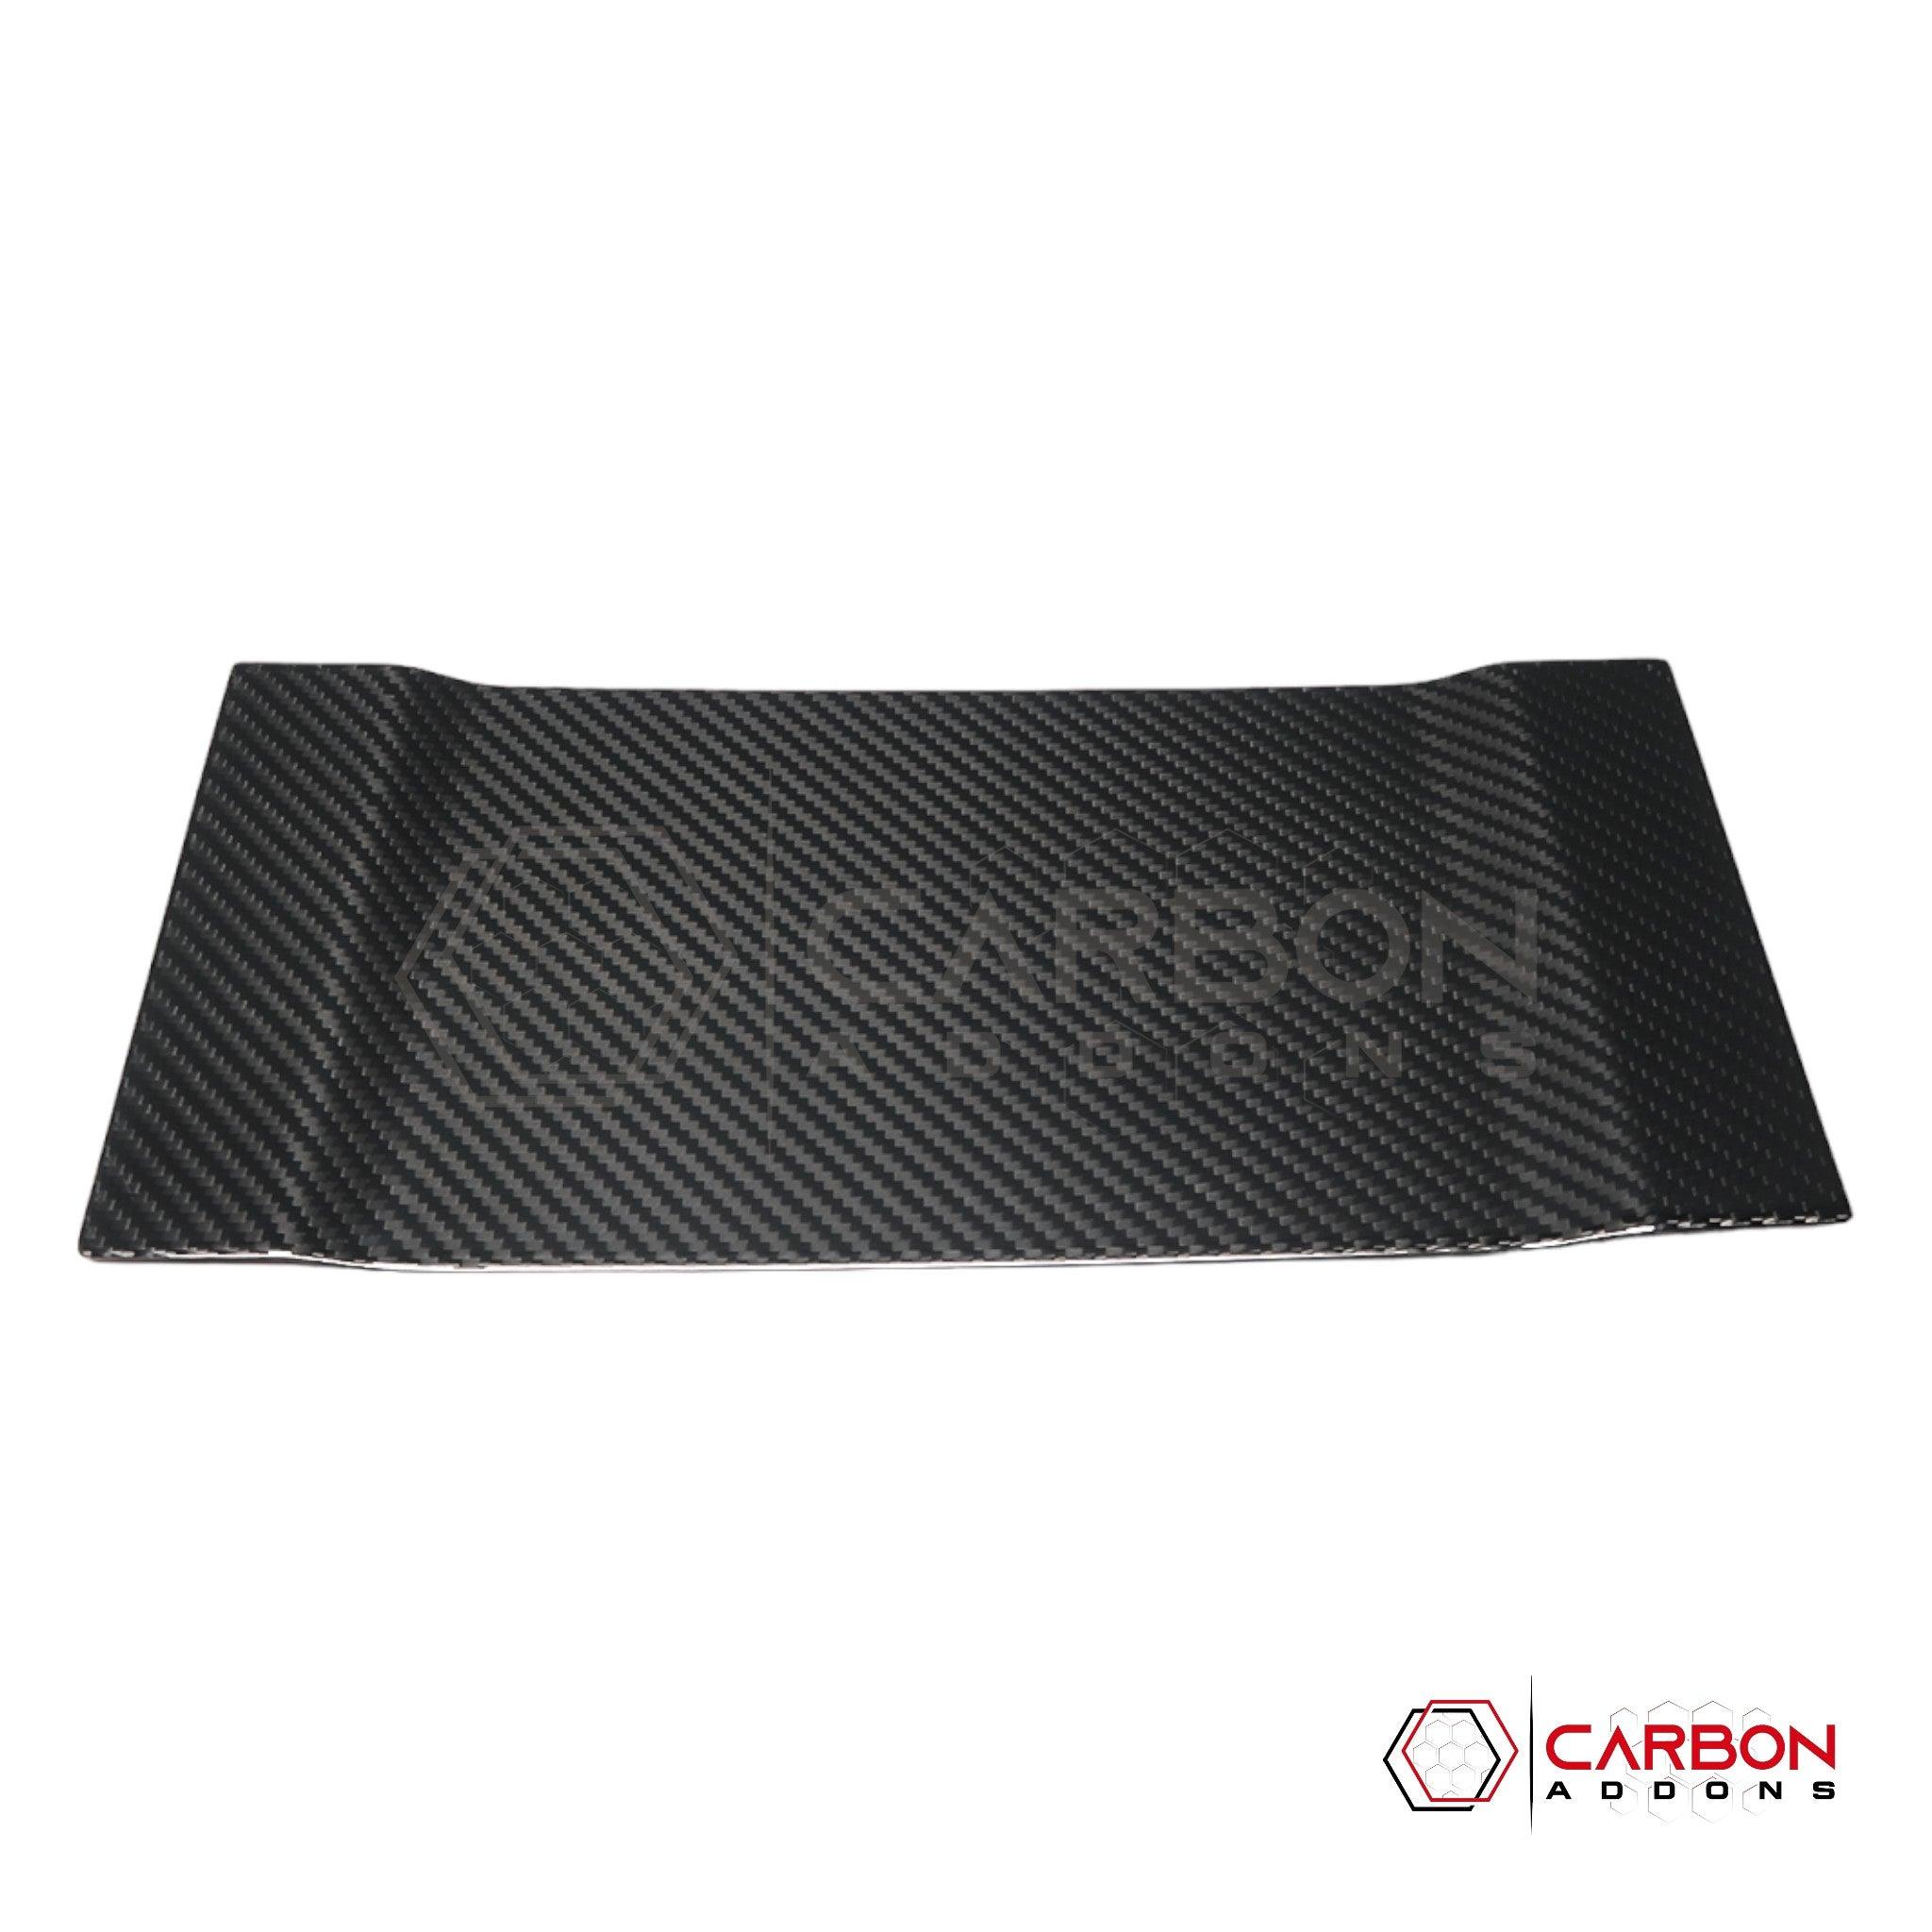 [Coming Soon] Ford F150 2021-Up Center Console Wireless Charger/Coin Tray Hard Carbon Fiber Cover - carbonaddons Carbon Fiber Parts, Accessories, Upgrades, Mods